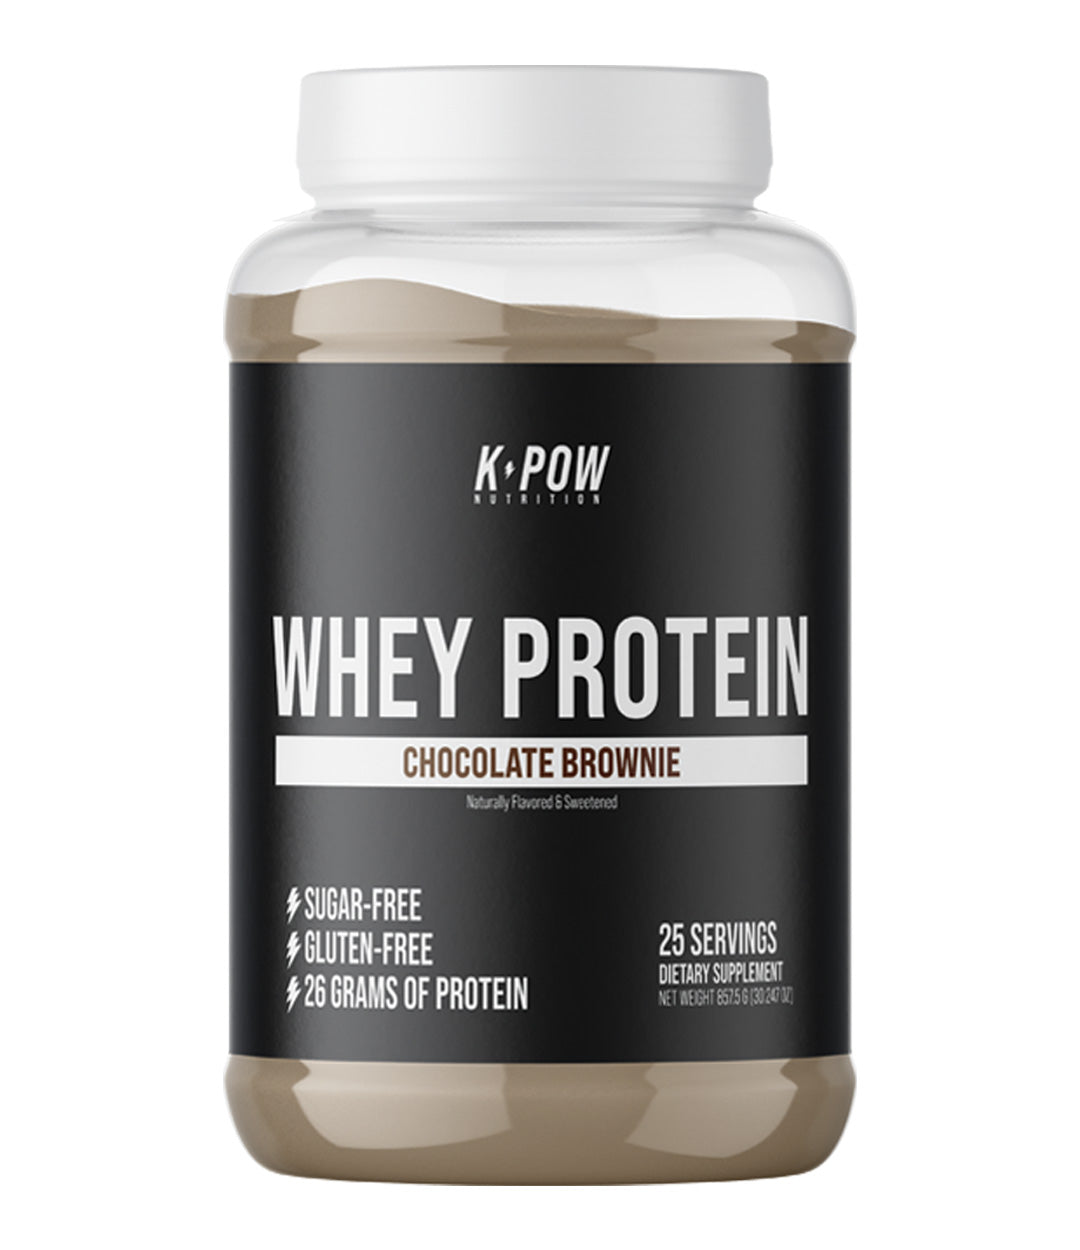 Whey Protein // All Natural Protein Powder Stack